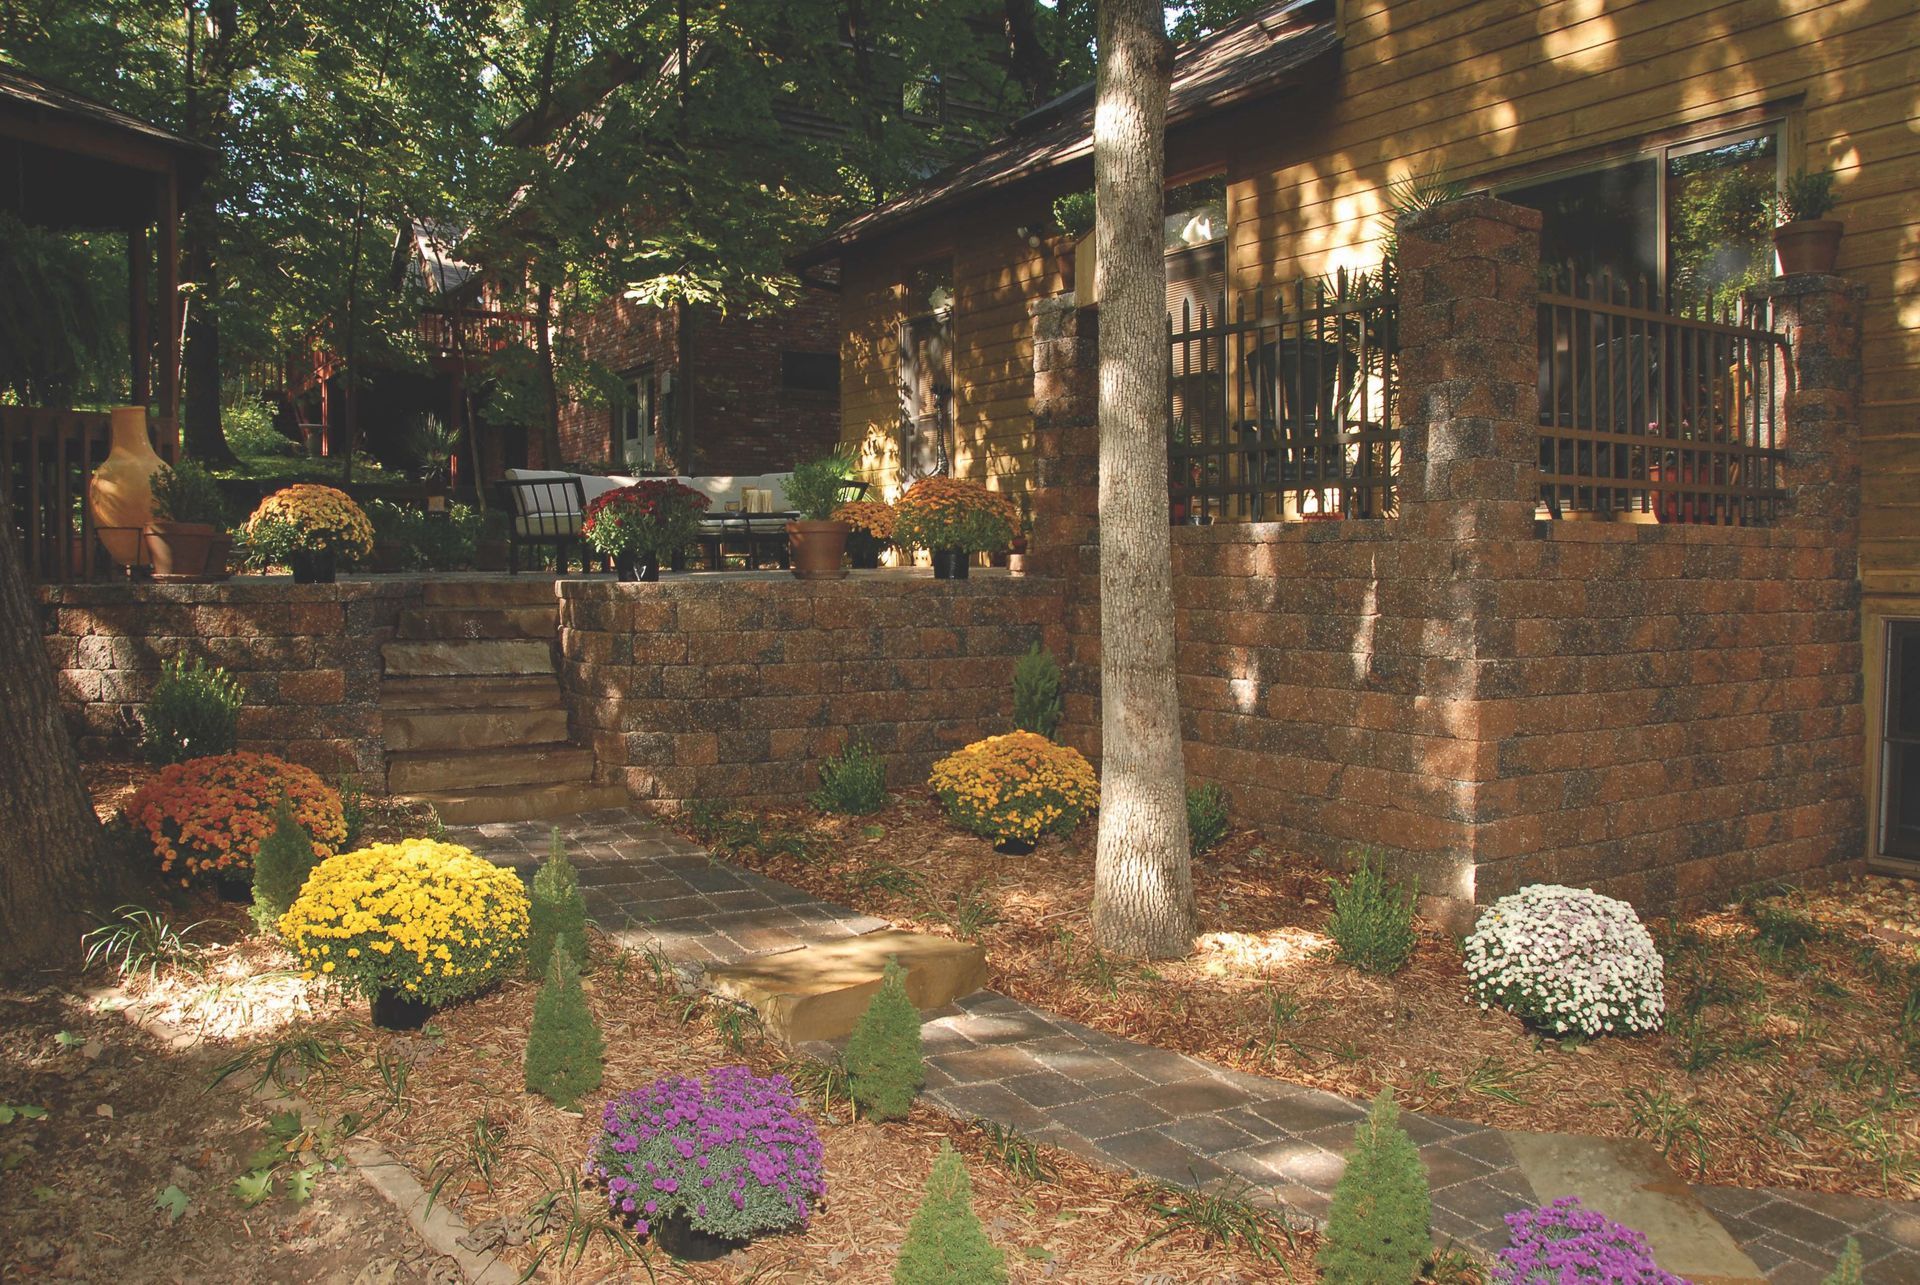 Explore Stockman Stoneworks Beautiful Landscaping and Paving Work in Central Missouri & Beyond.